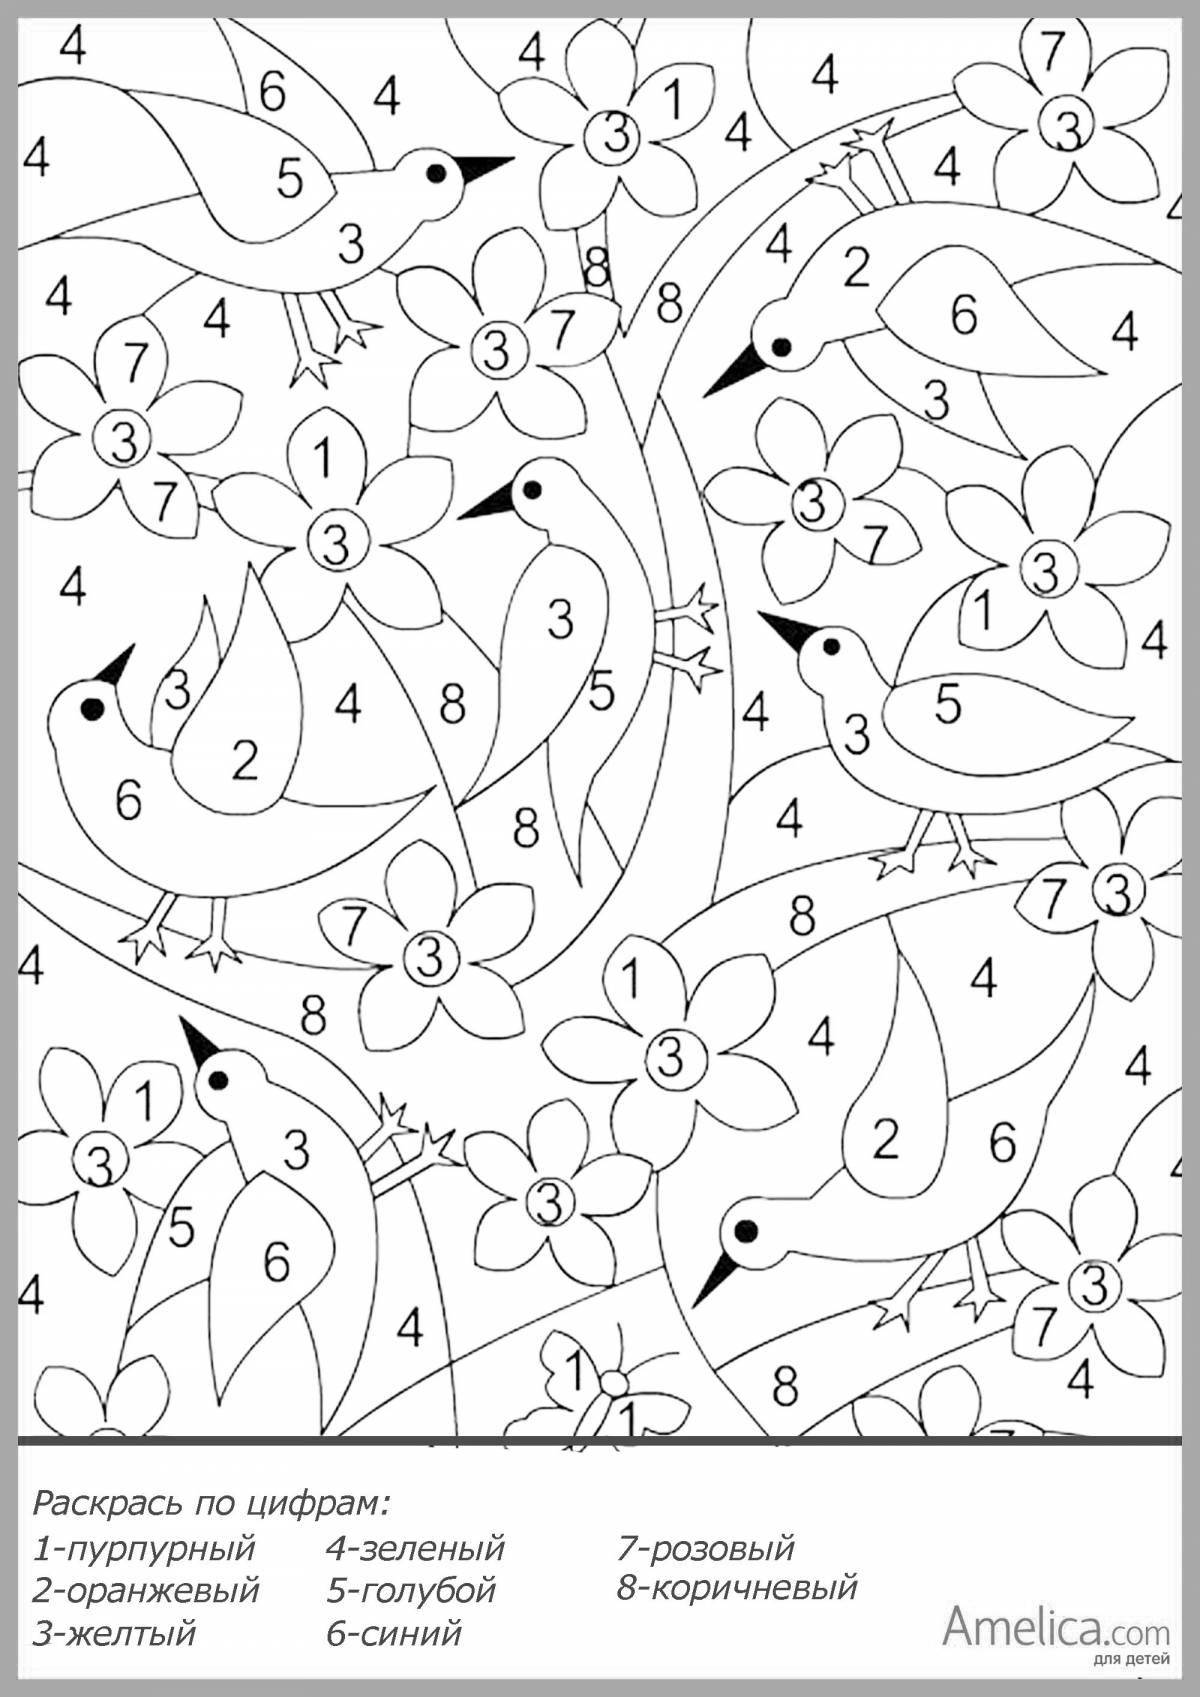 6 Years in Numbers Inspirational Coloring Page